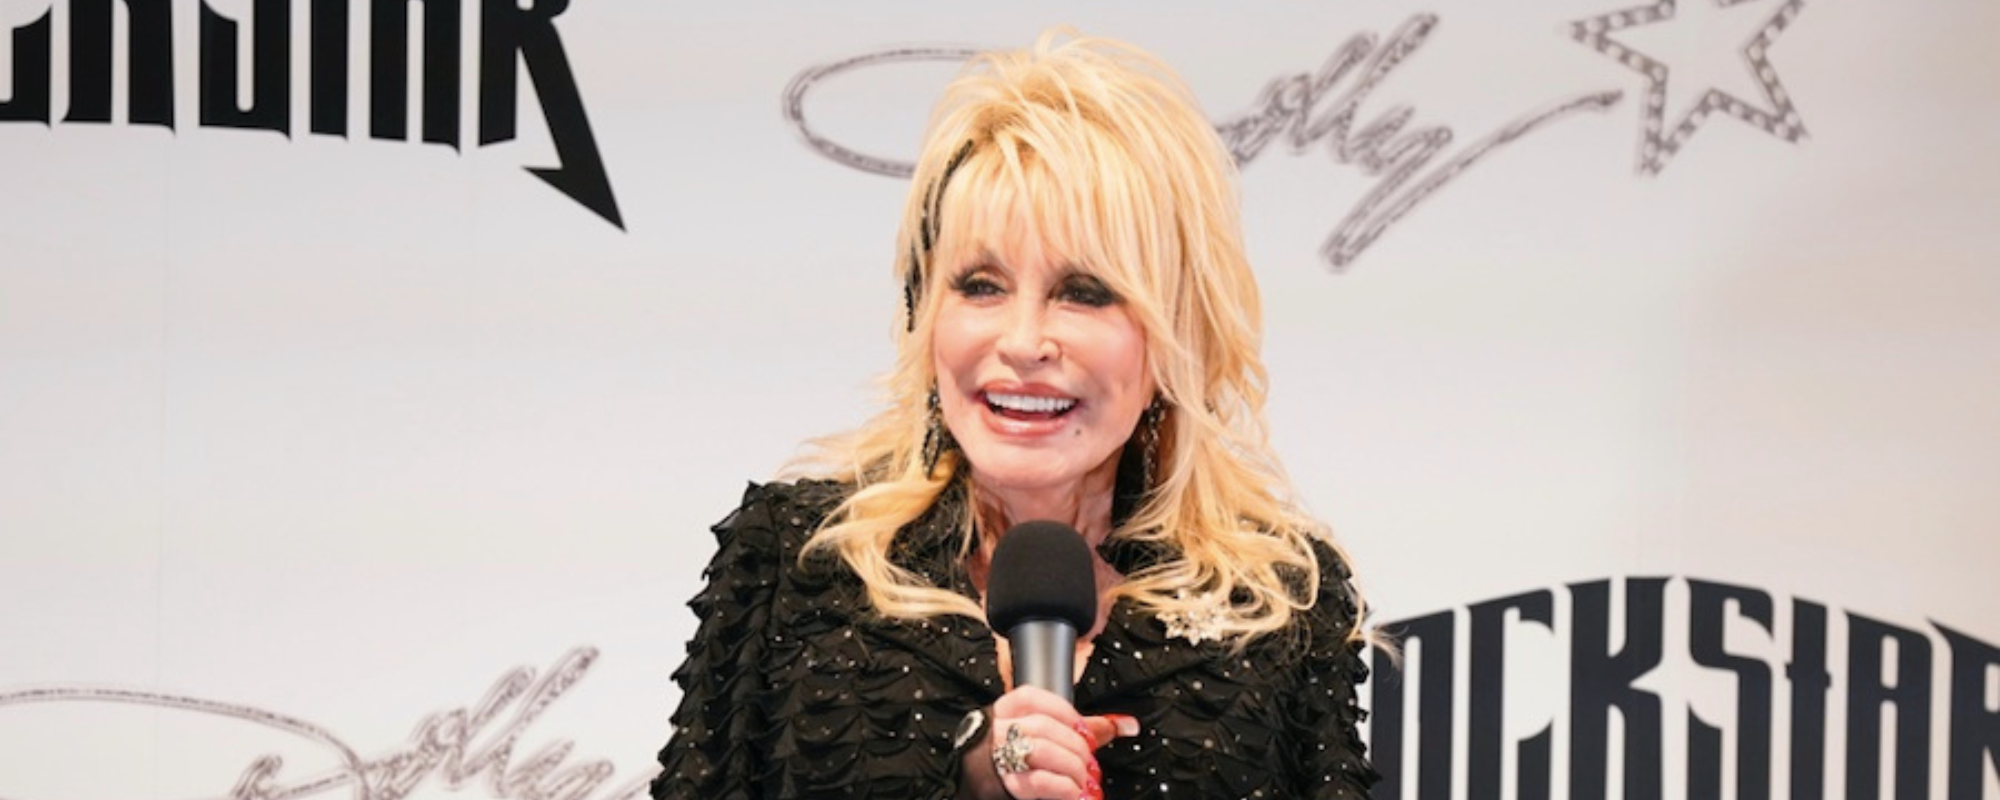 Dolly Parton Reveals How She Felt Before Recording Her First Rock ‘N’ Roll Album ‘Rockstar’